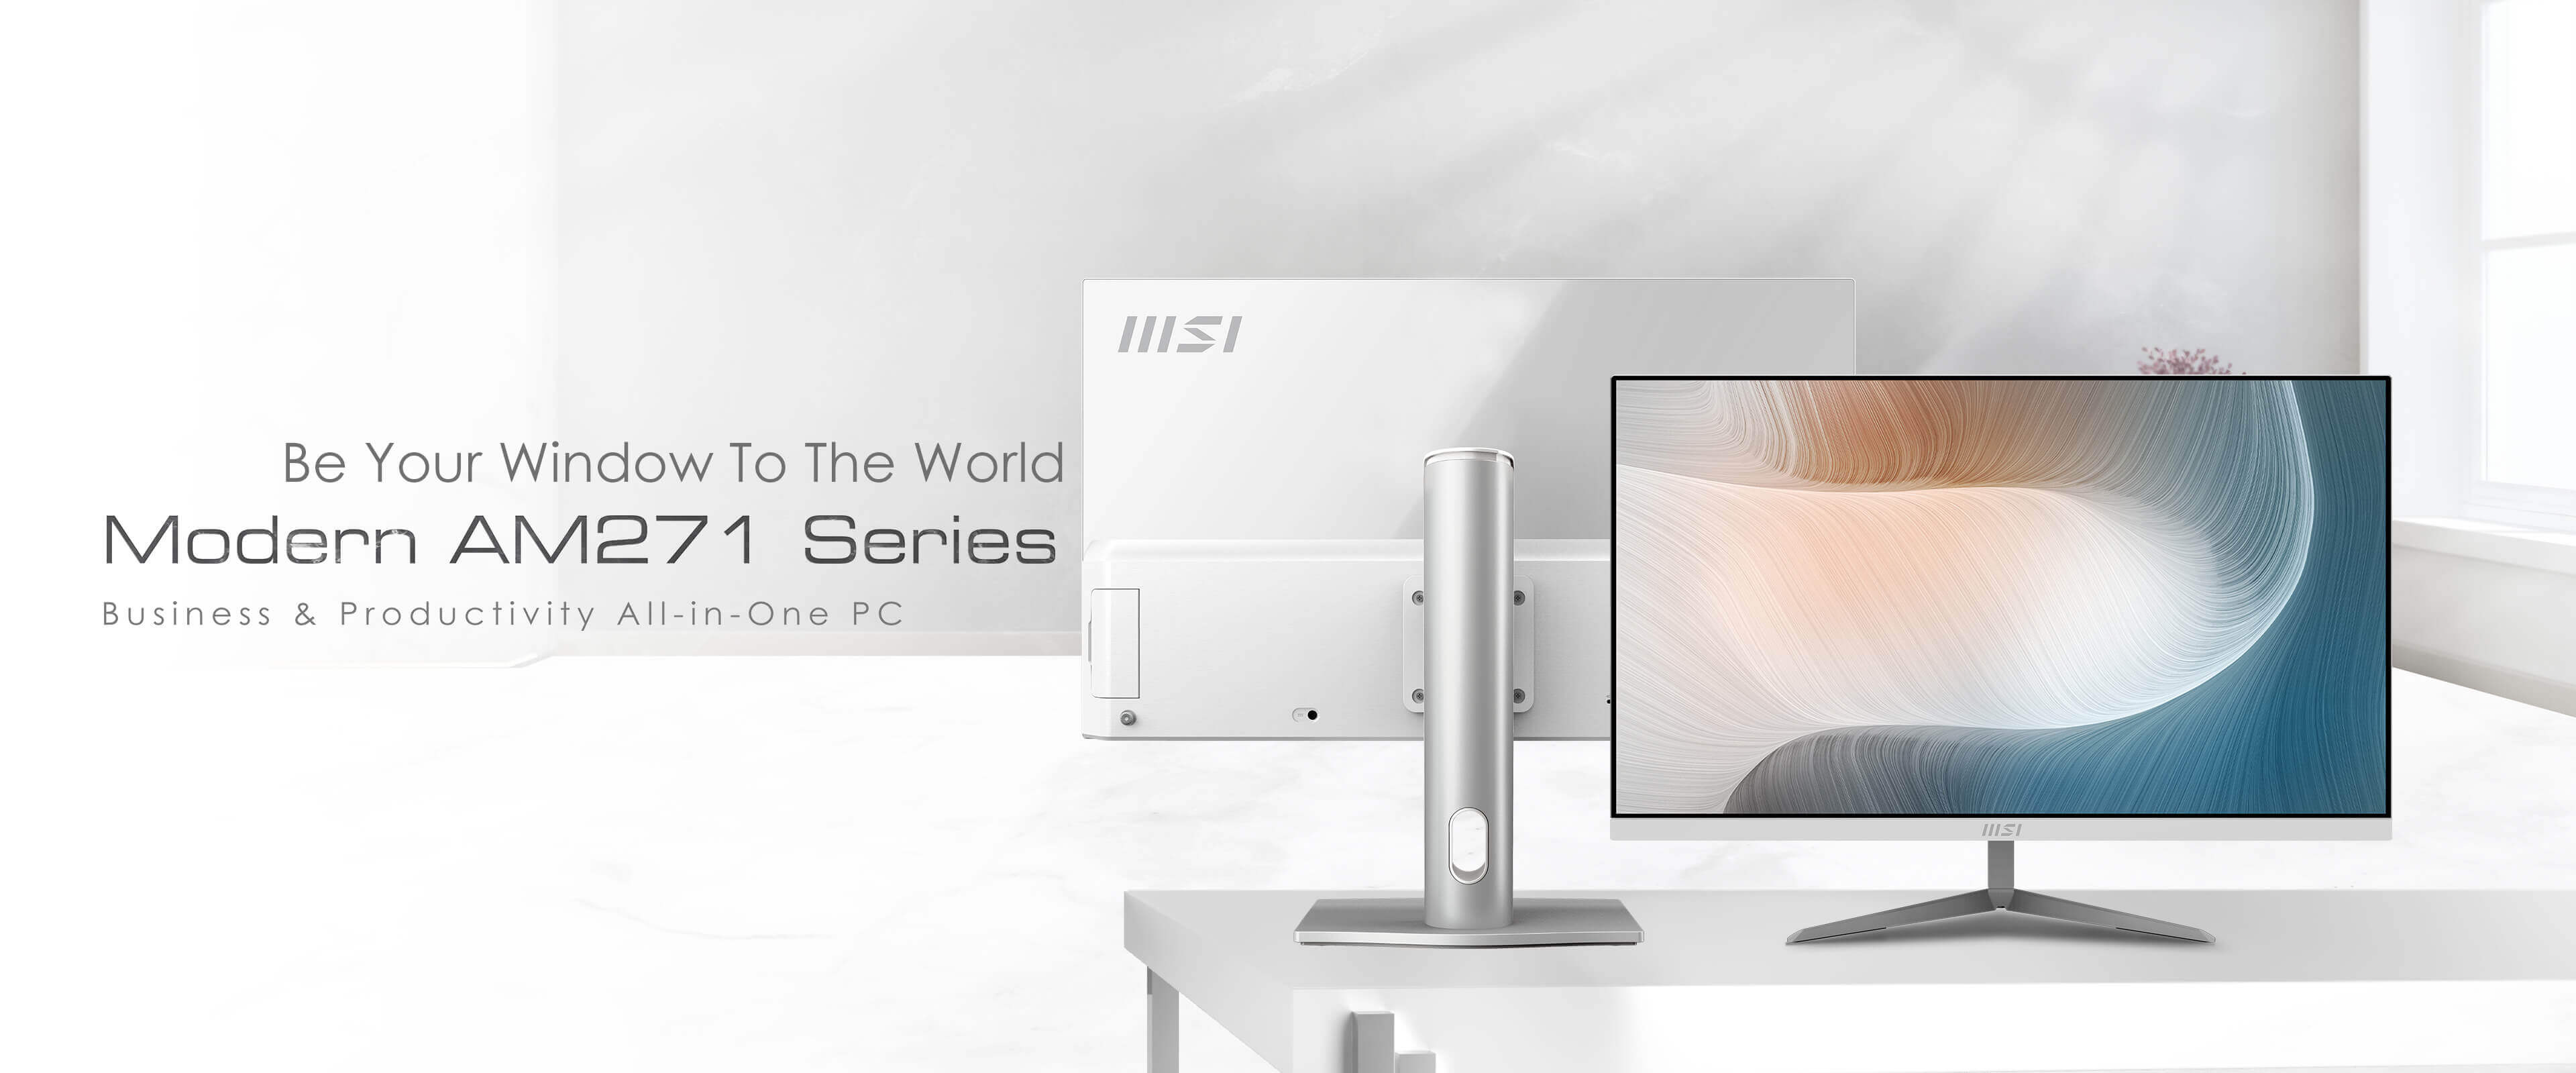 MSI All-in-One Computer